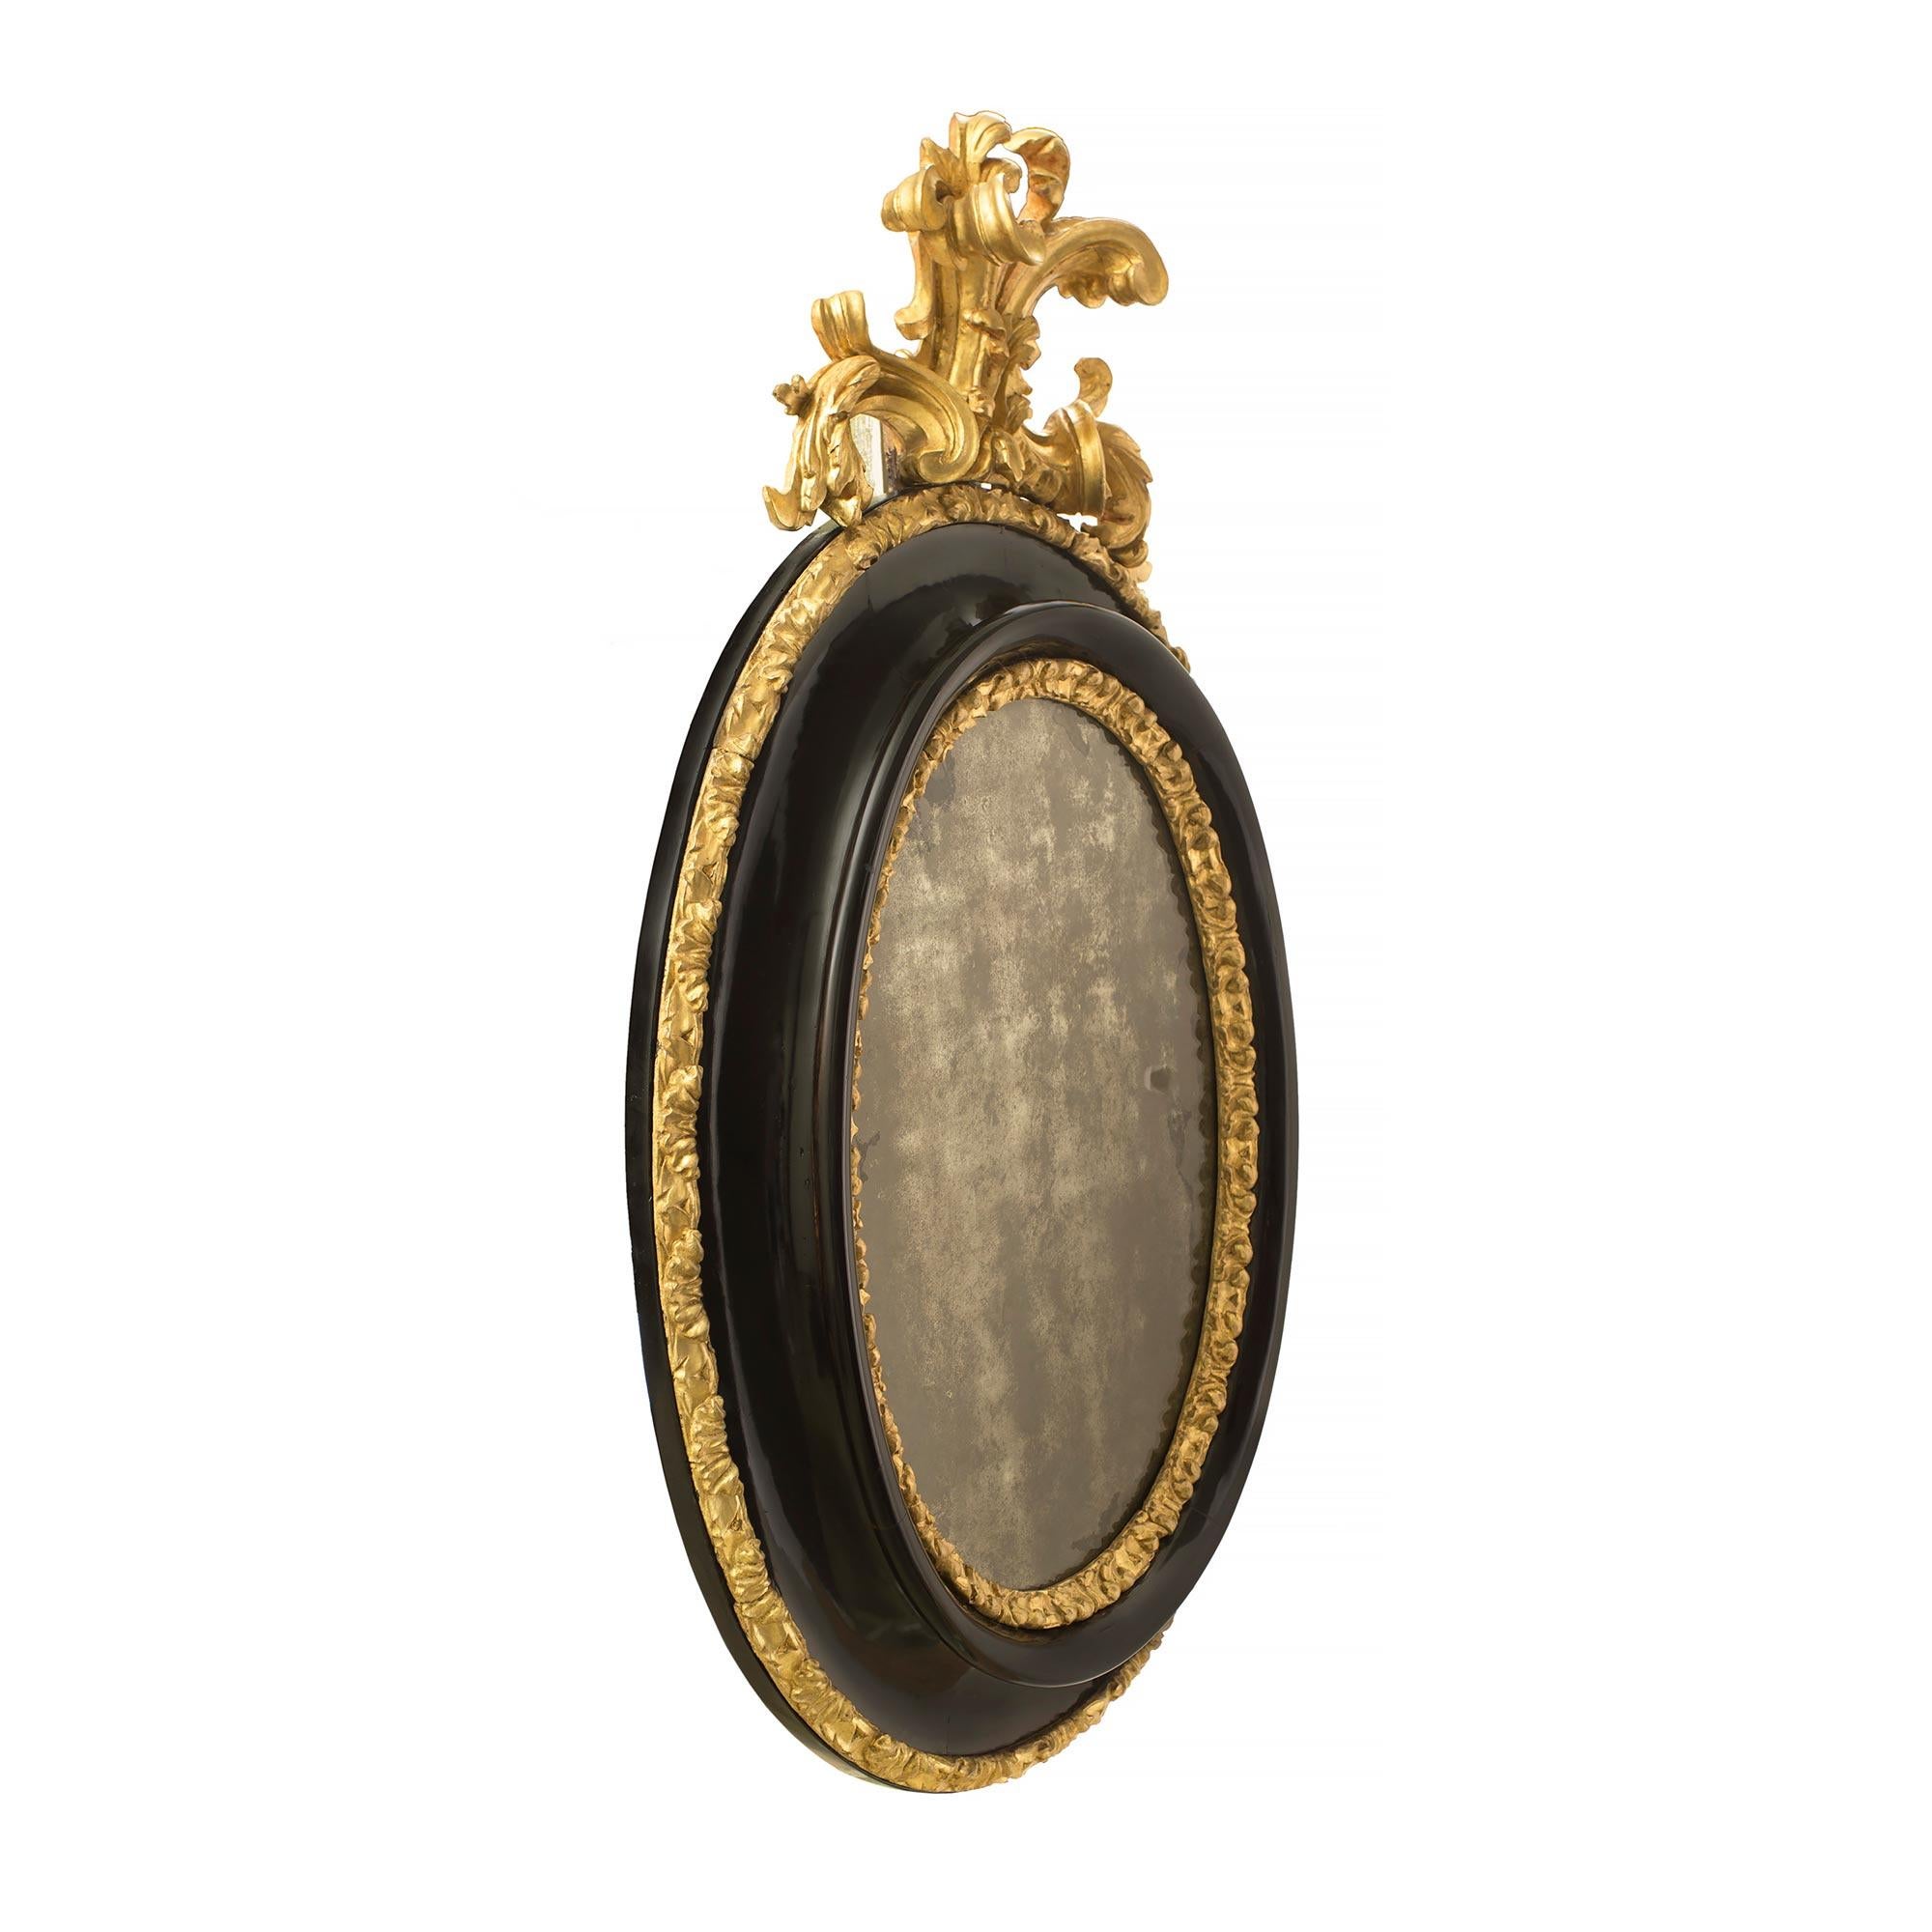 A striking Italian 17th century giltwood and ebonized fruitwood Florentine mirror. The original oval mirror plate is framed within two finely carved foliate giltwood bands centered by a mottled ebonized fruitwood border. All below the impressive